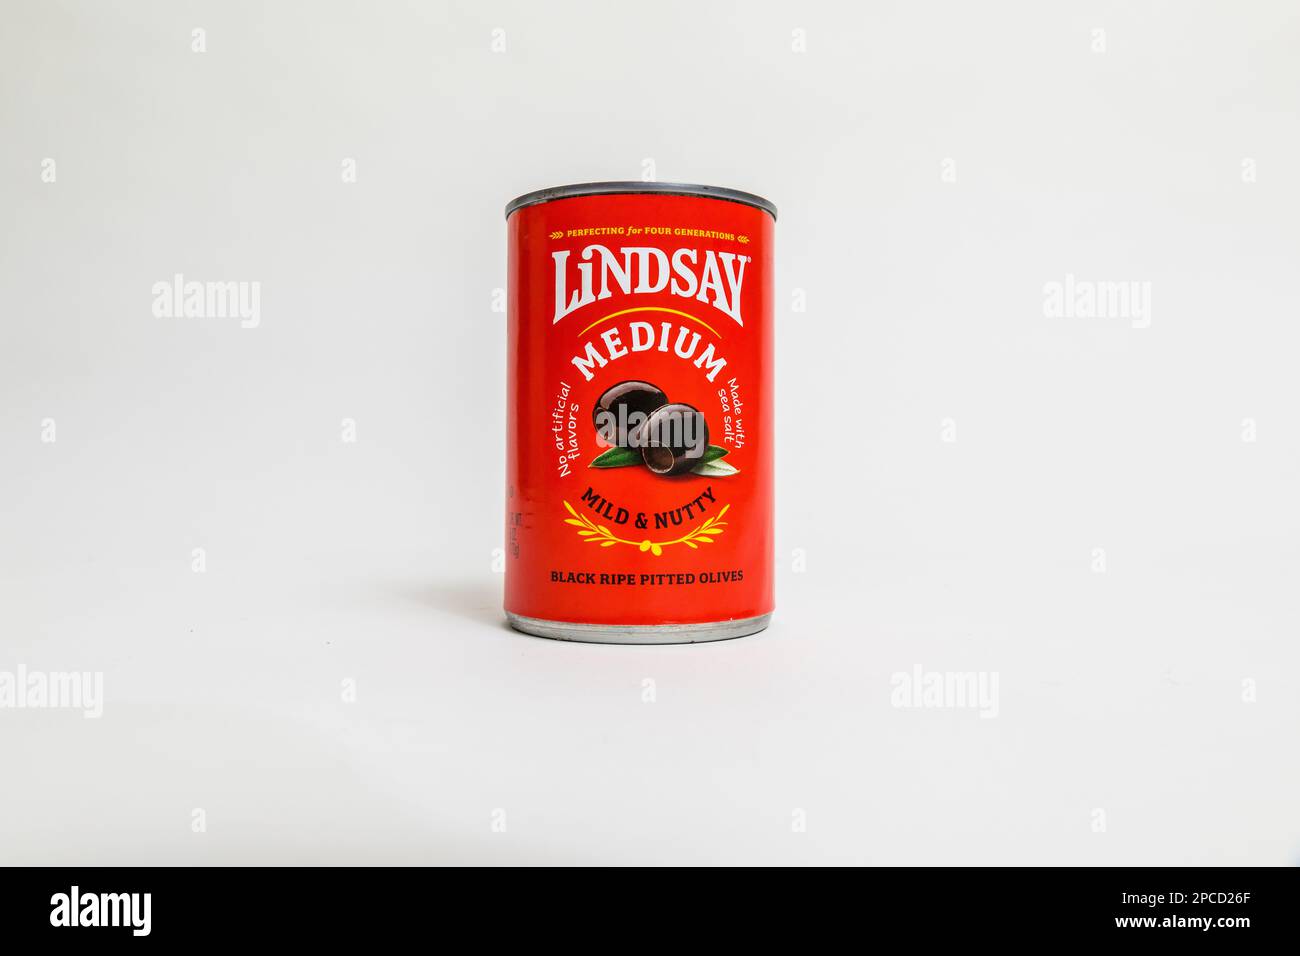 A can of California Grown Lindsay Medium Olives Stock Photo